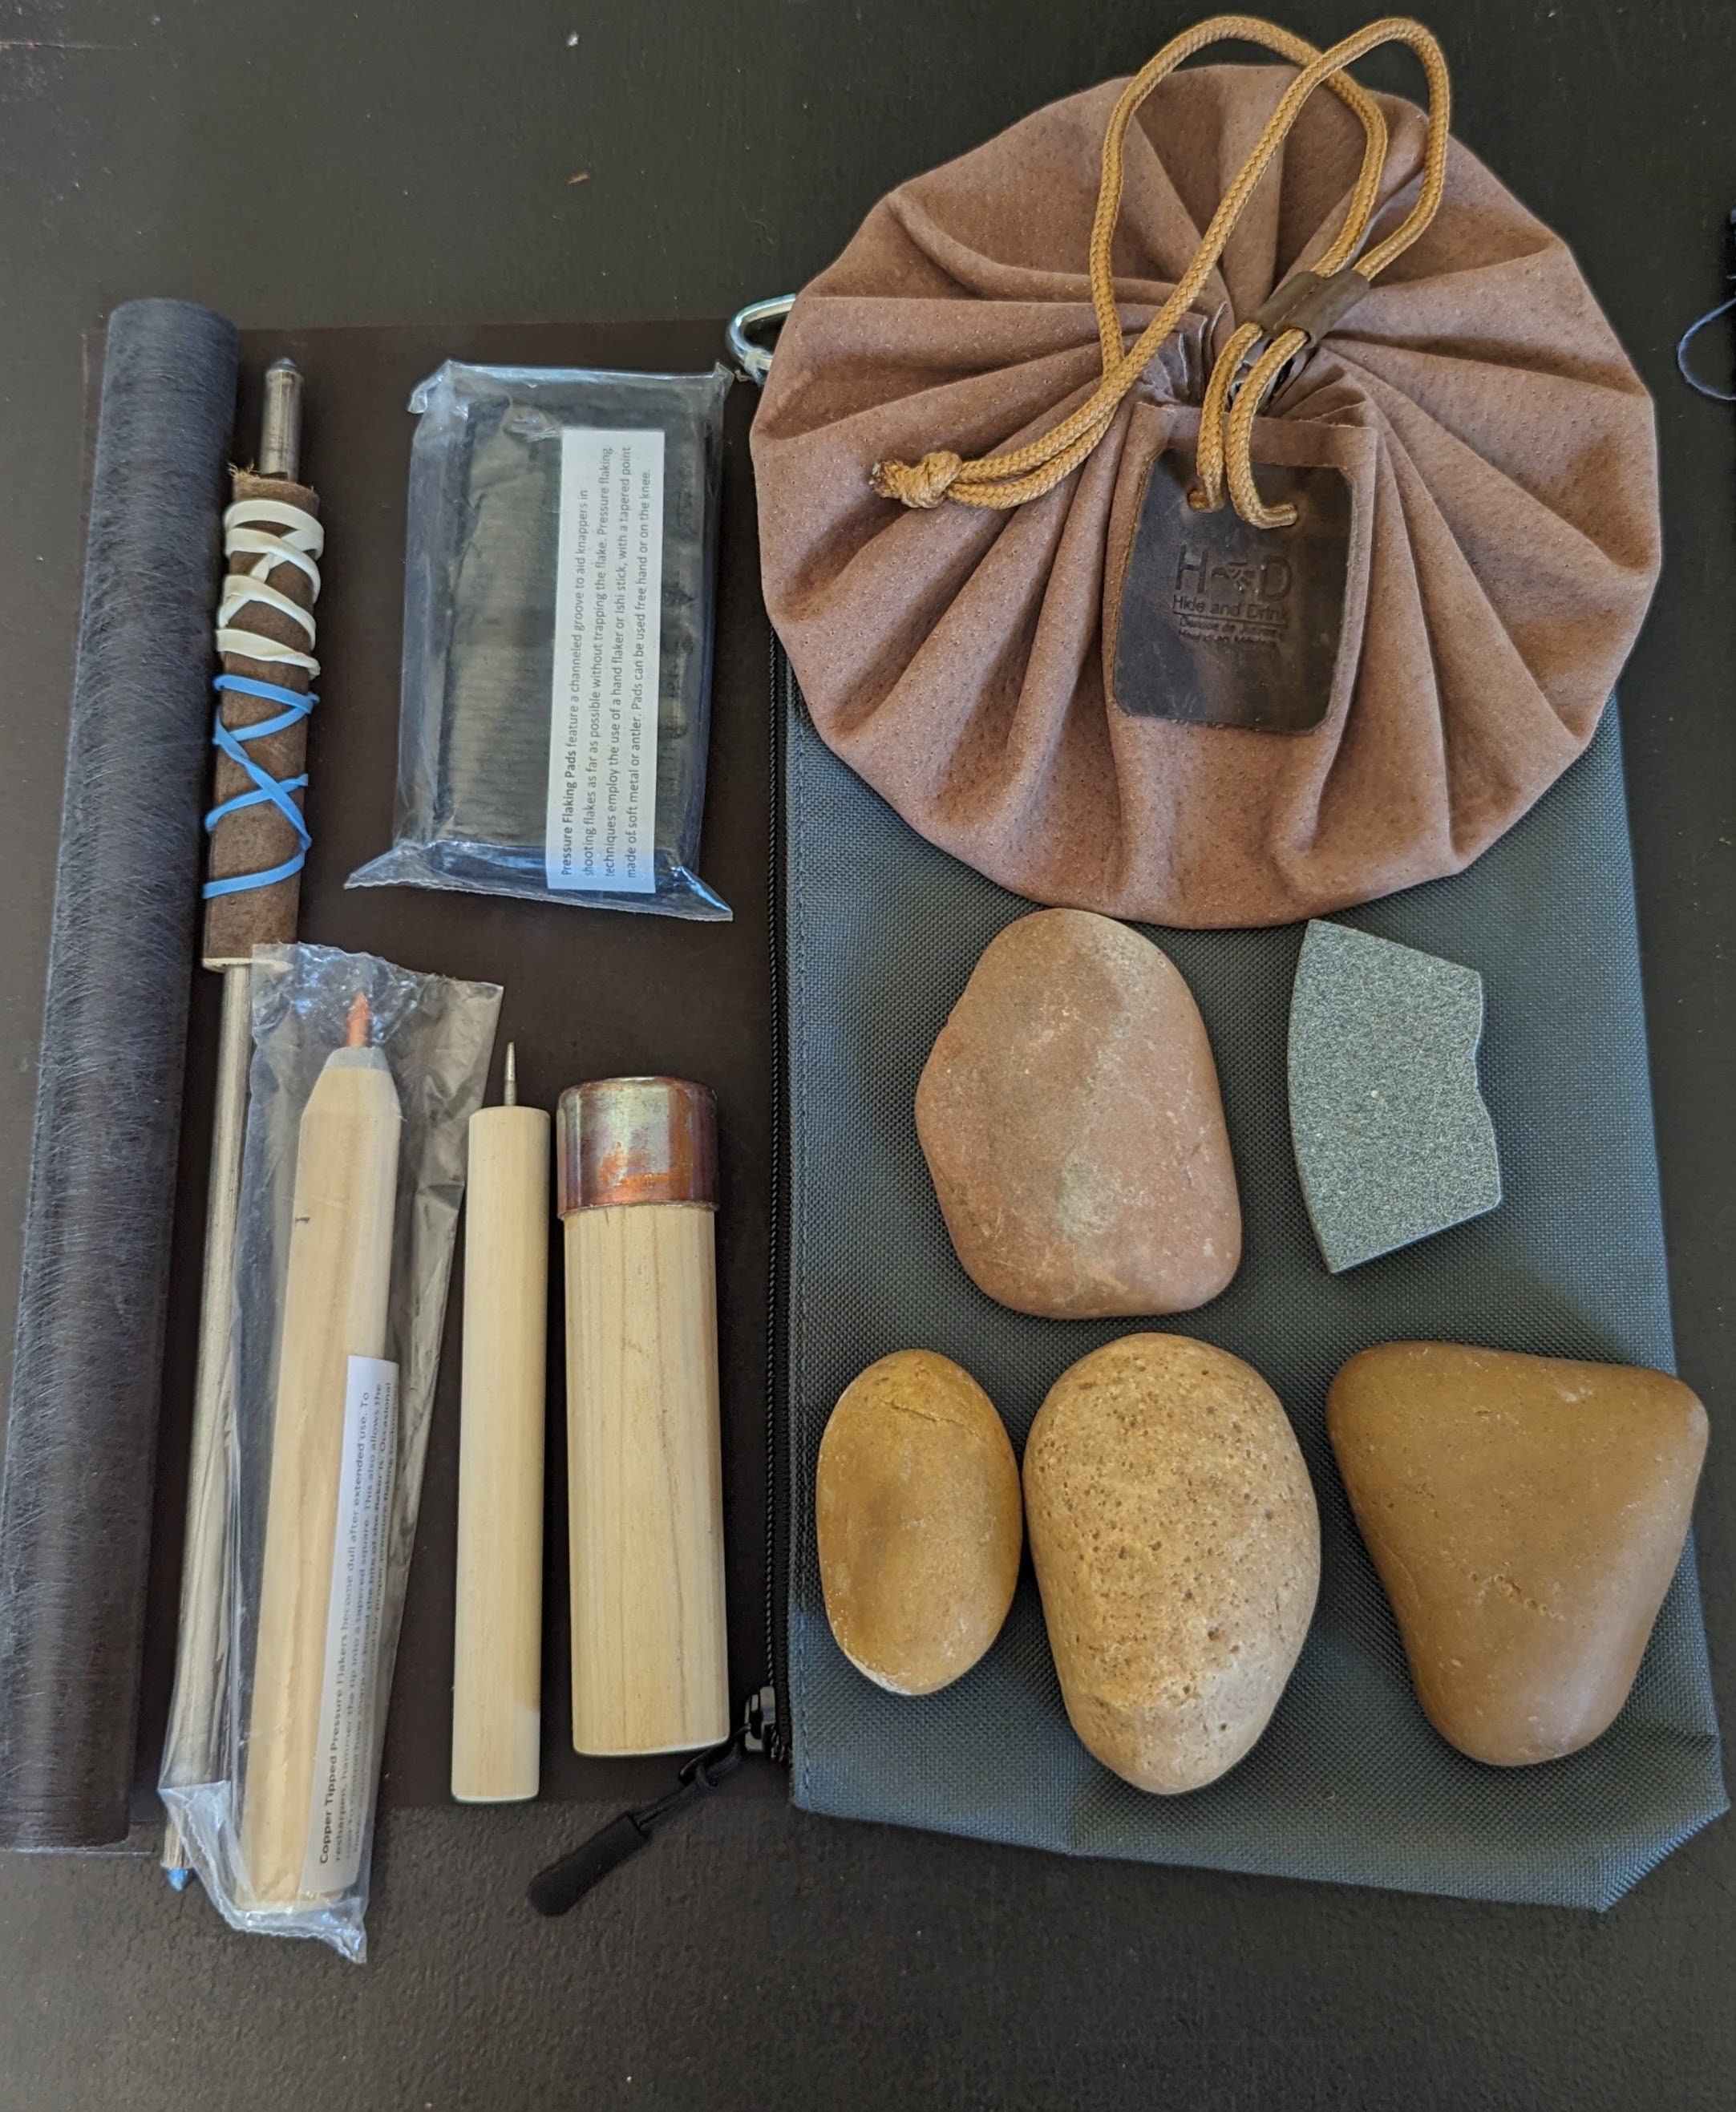 Flint knapping kit for making arrowheads and primitive tools